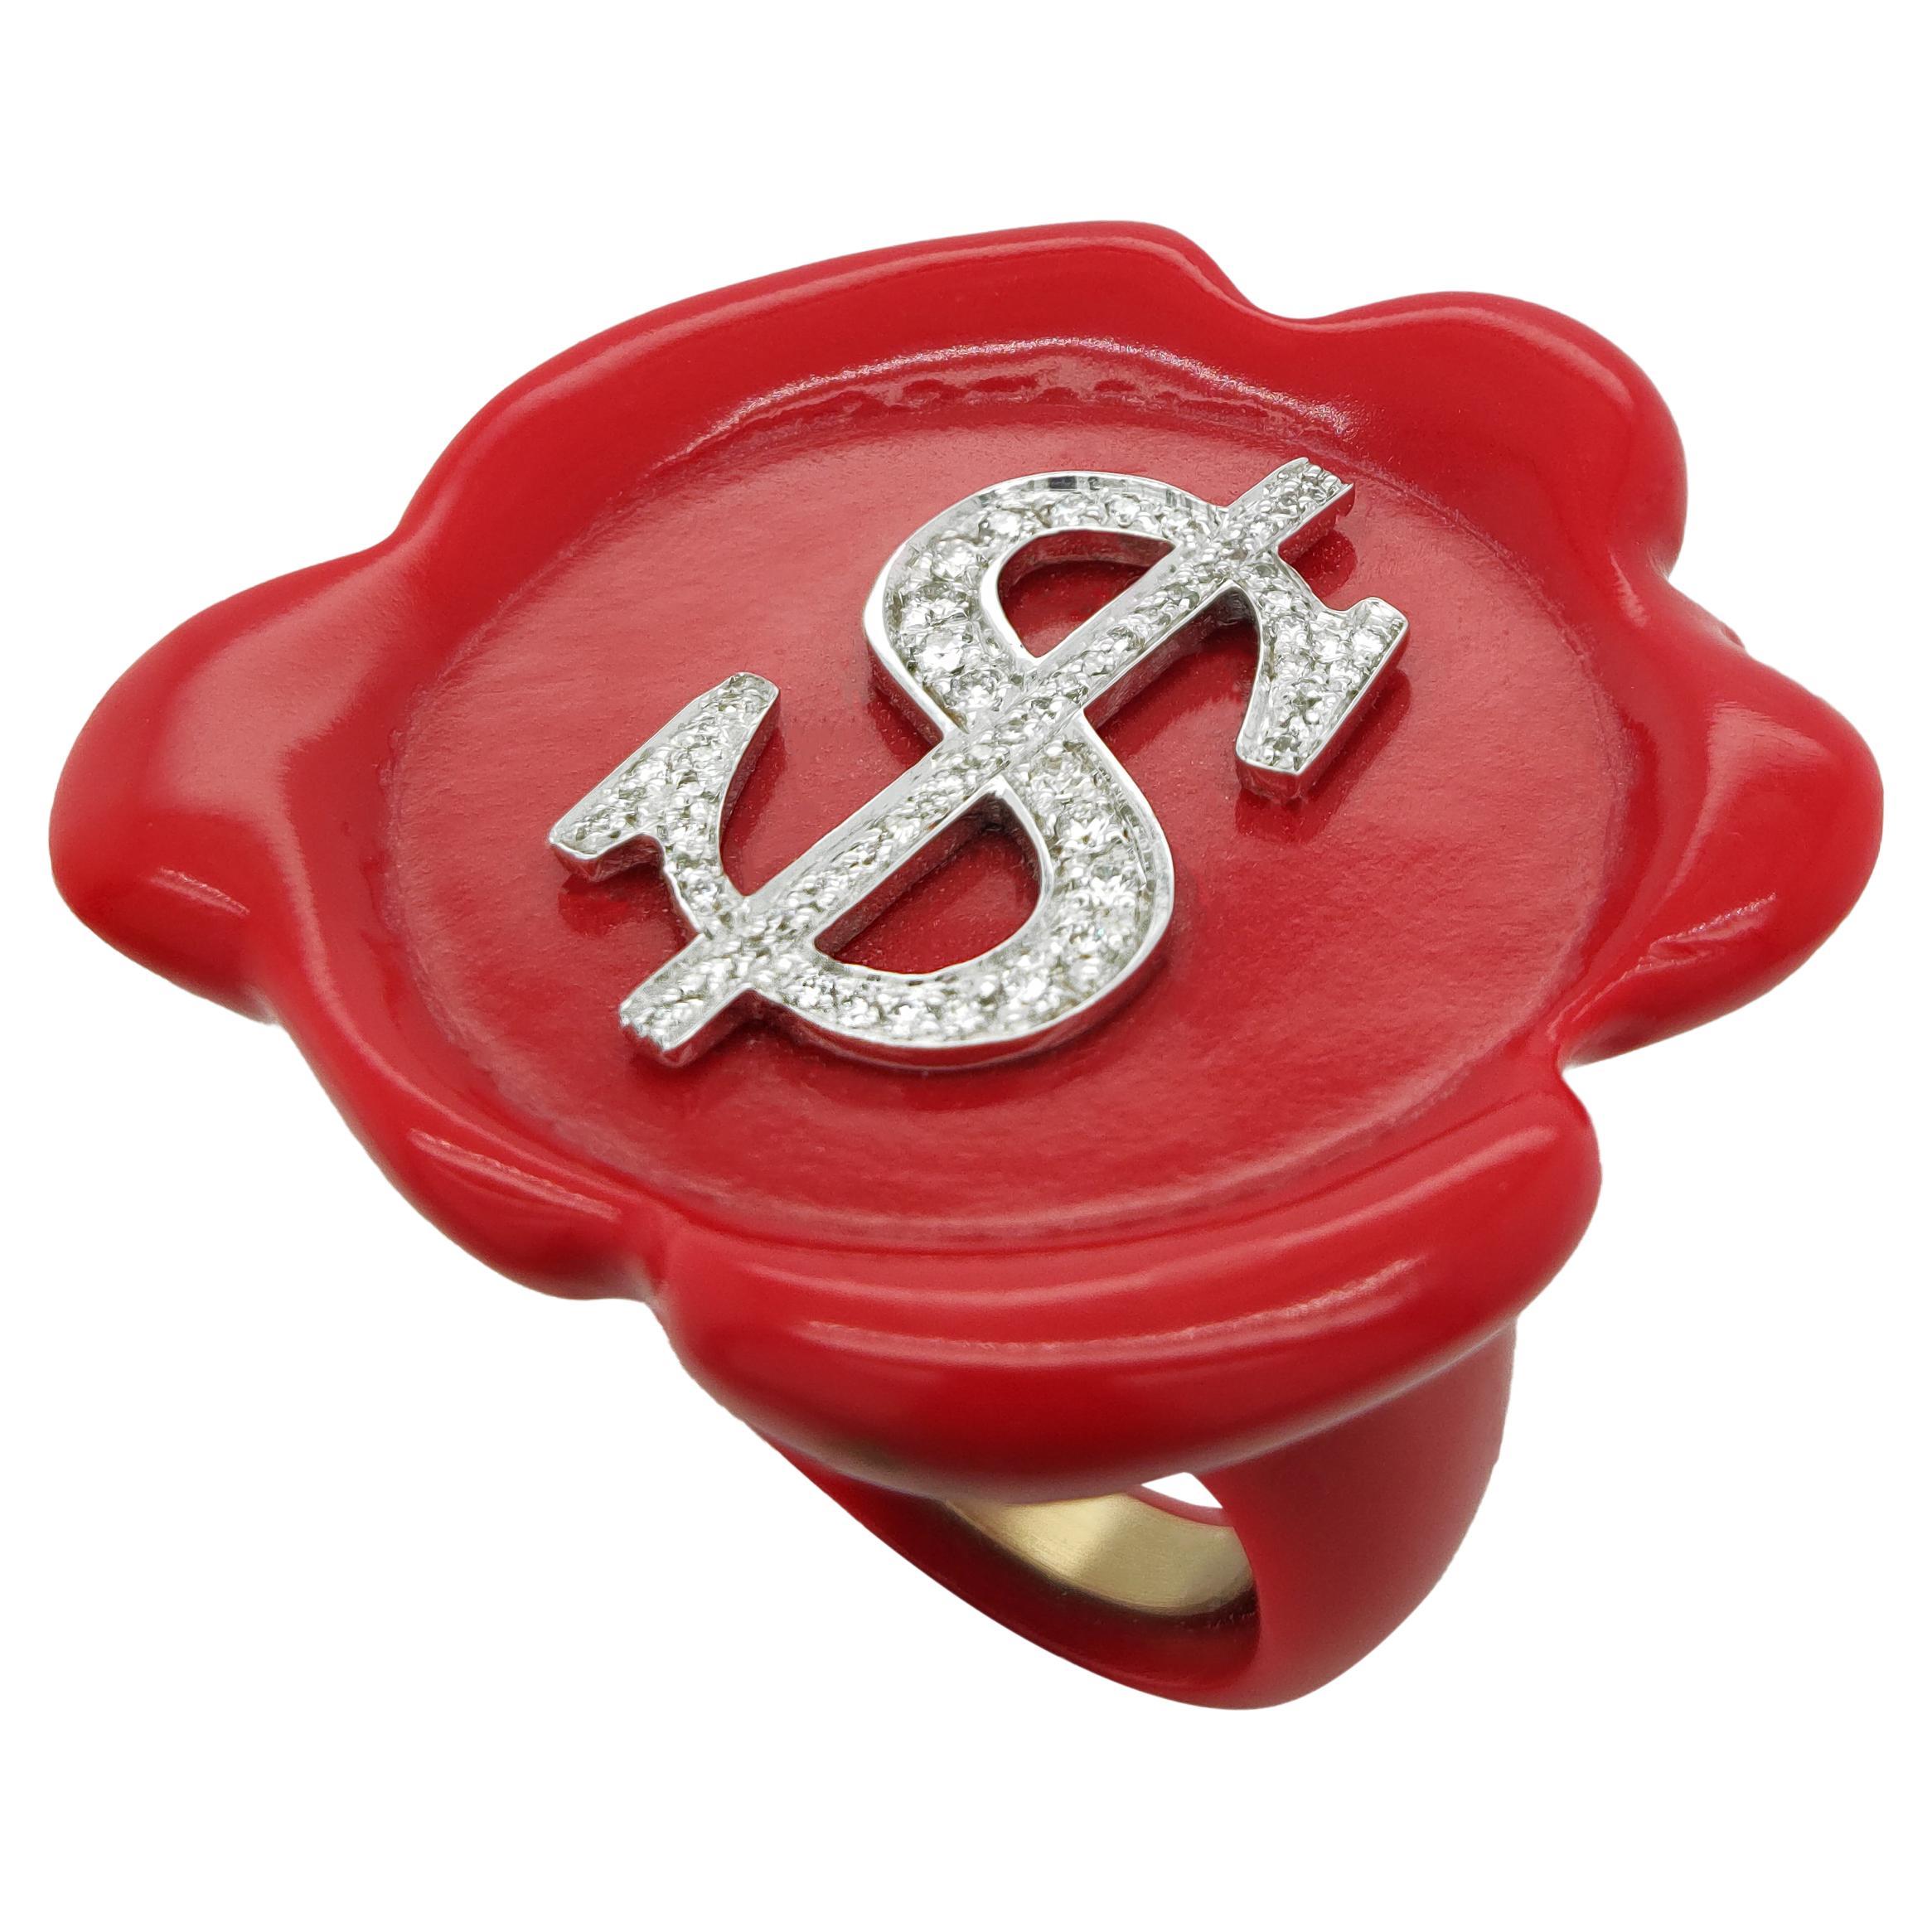 Sigillo Ring in Red Corian, 18K gold and diamonds